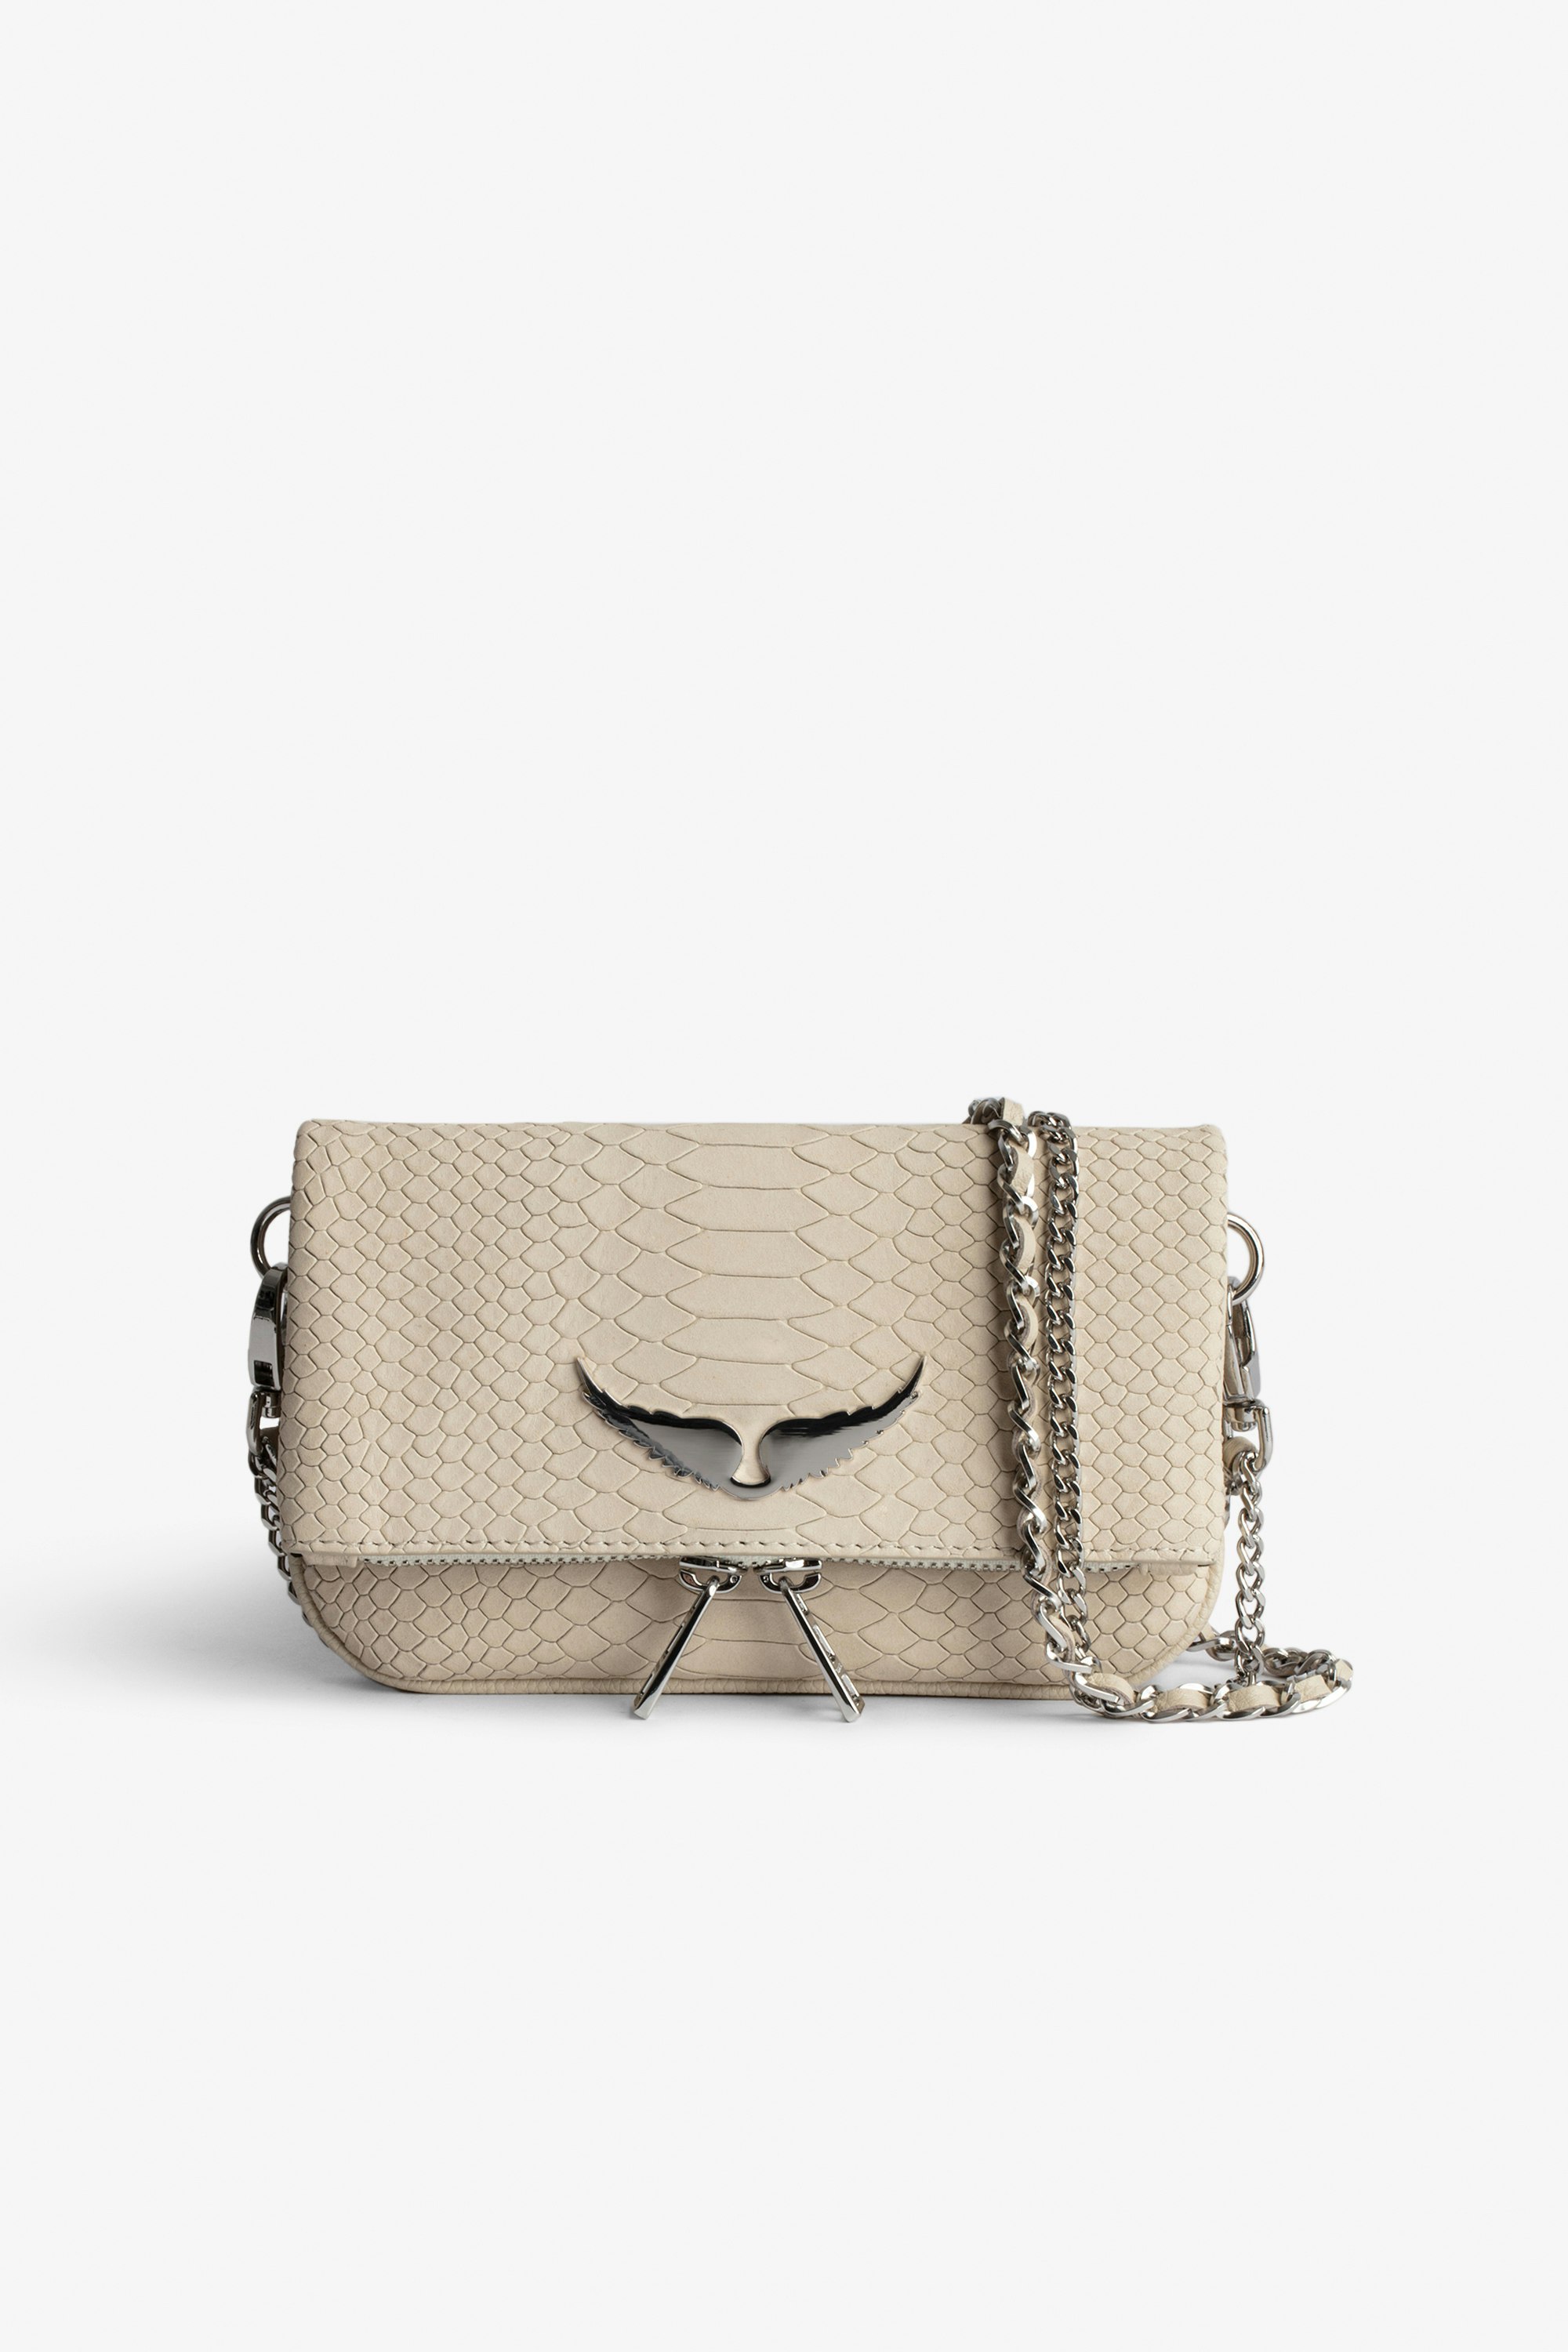 Nano Soft Savage Rock Clutch - Women’s small clutch in ecru python-effect leather with double leather-and-metal chain